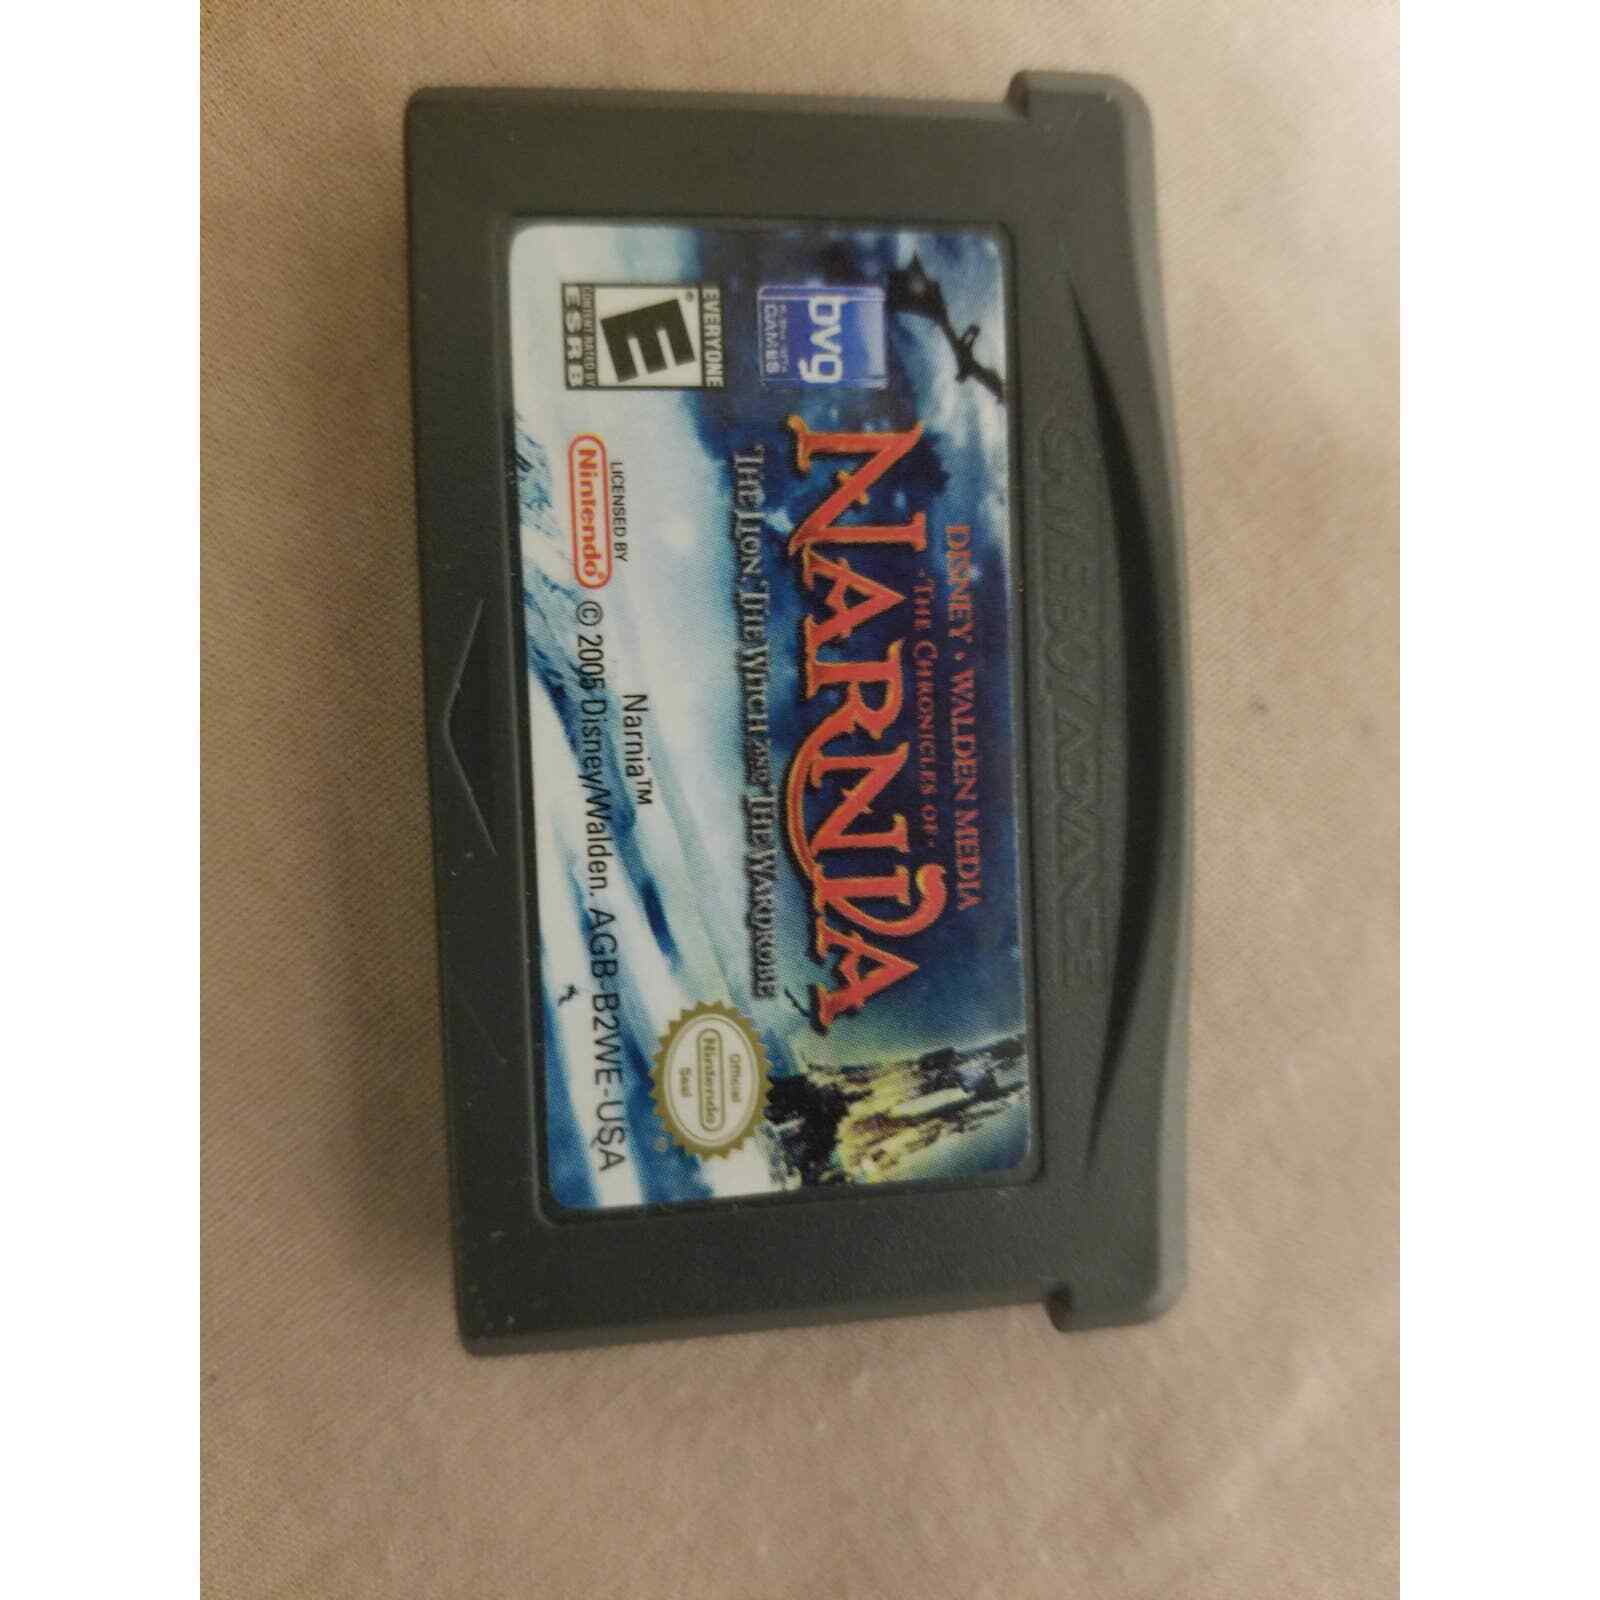 Primary image for Narnia Game For Nintendo Gam eBoy Advance Game Only Tested